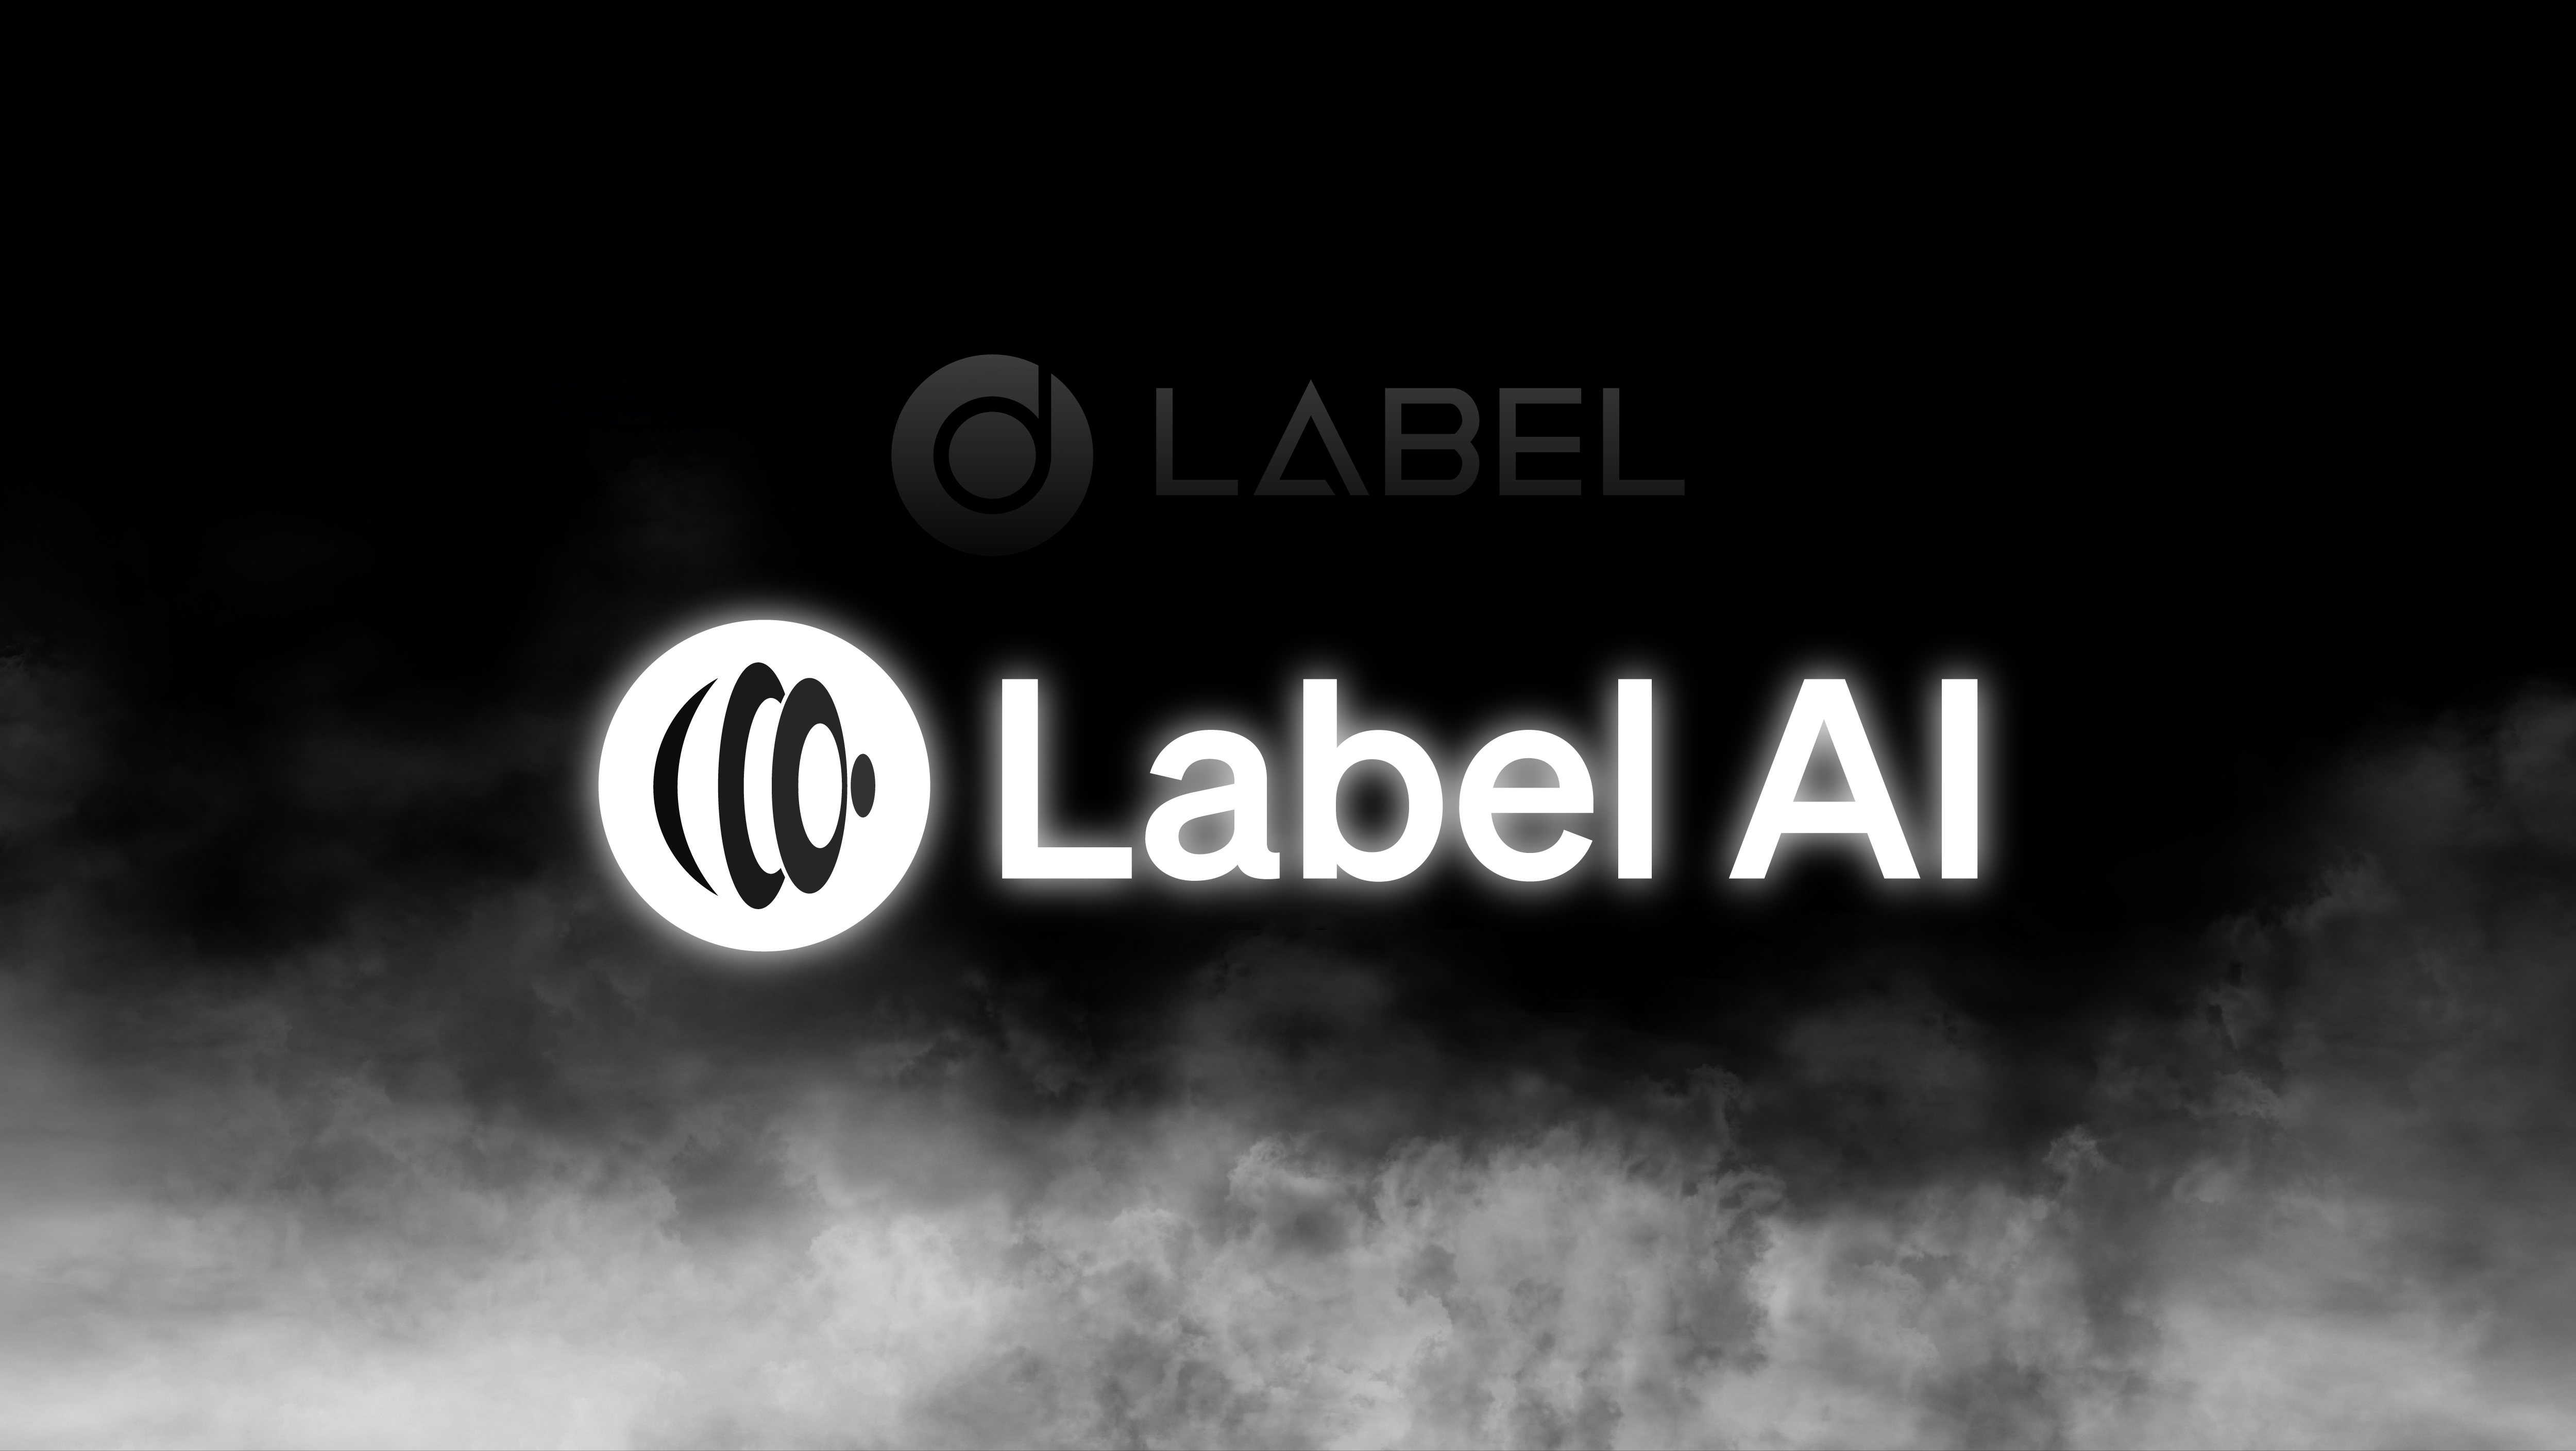 LABEL Foundation Rebrands into LABEL AI: Shaping the Future of Music with AI and Blockchain Innovation